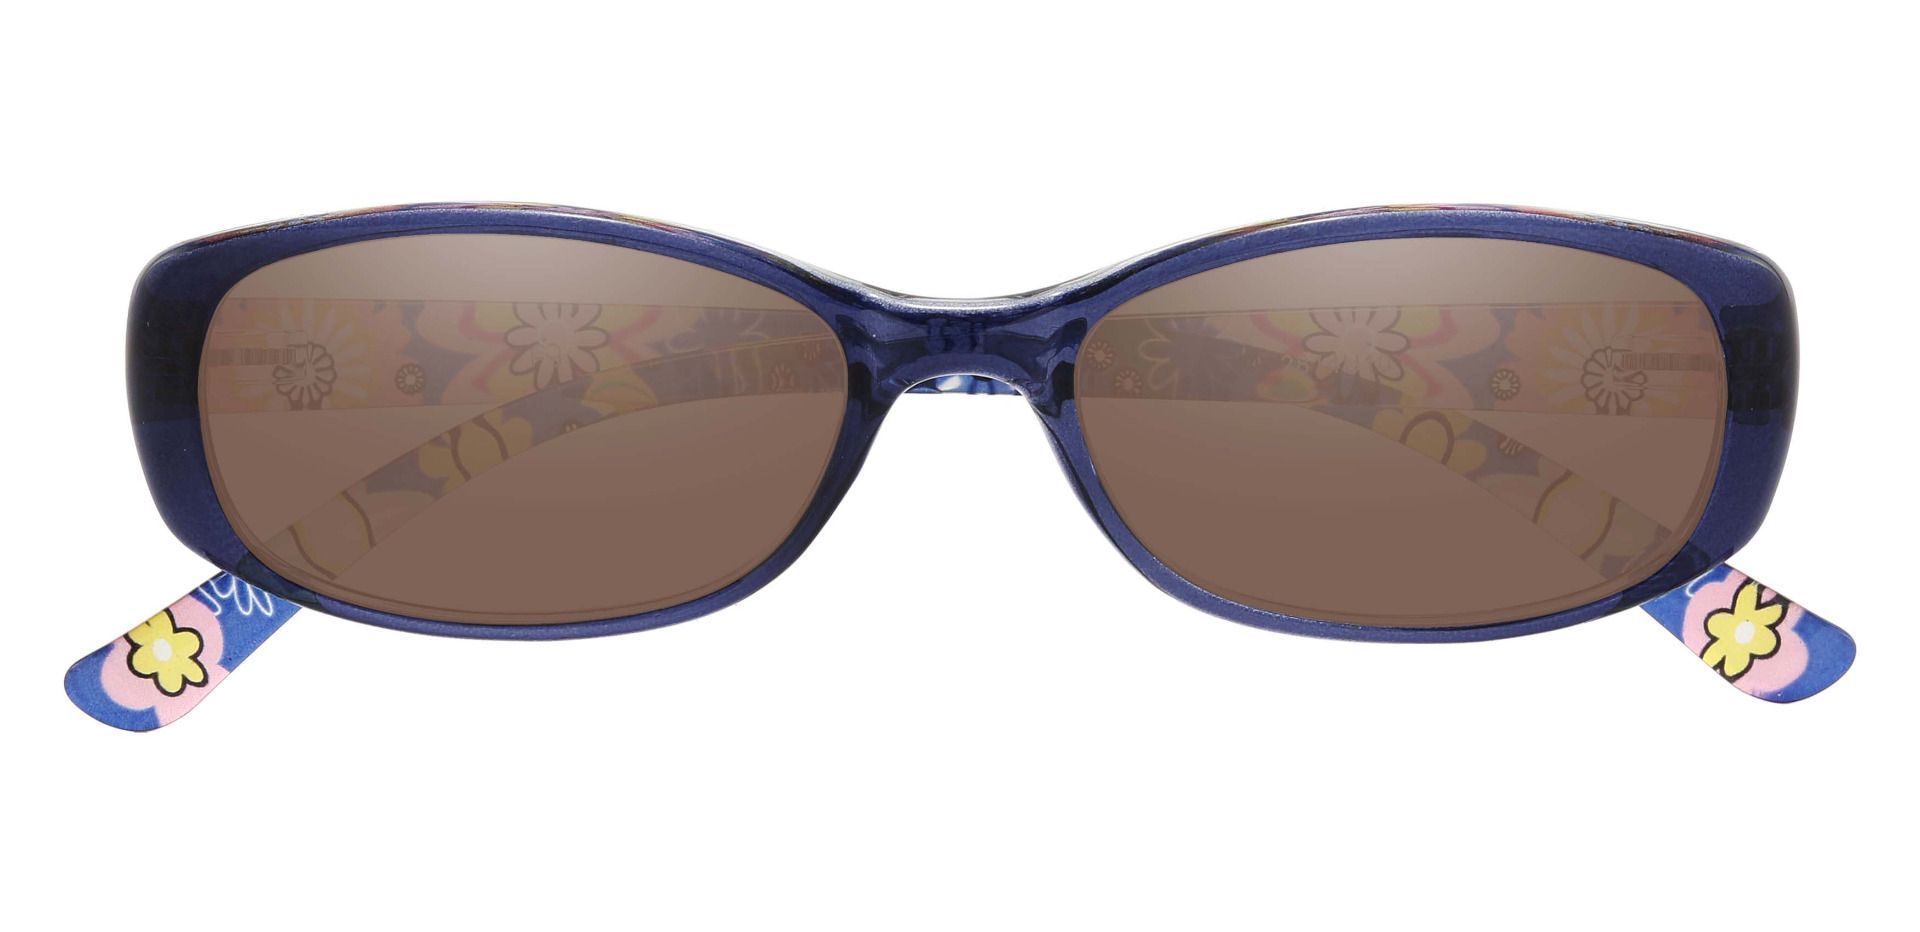 Bethesda Rectangle Non-Rx Sunglasses - Blue Frame With Brown Lenses